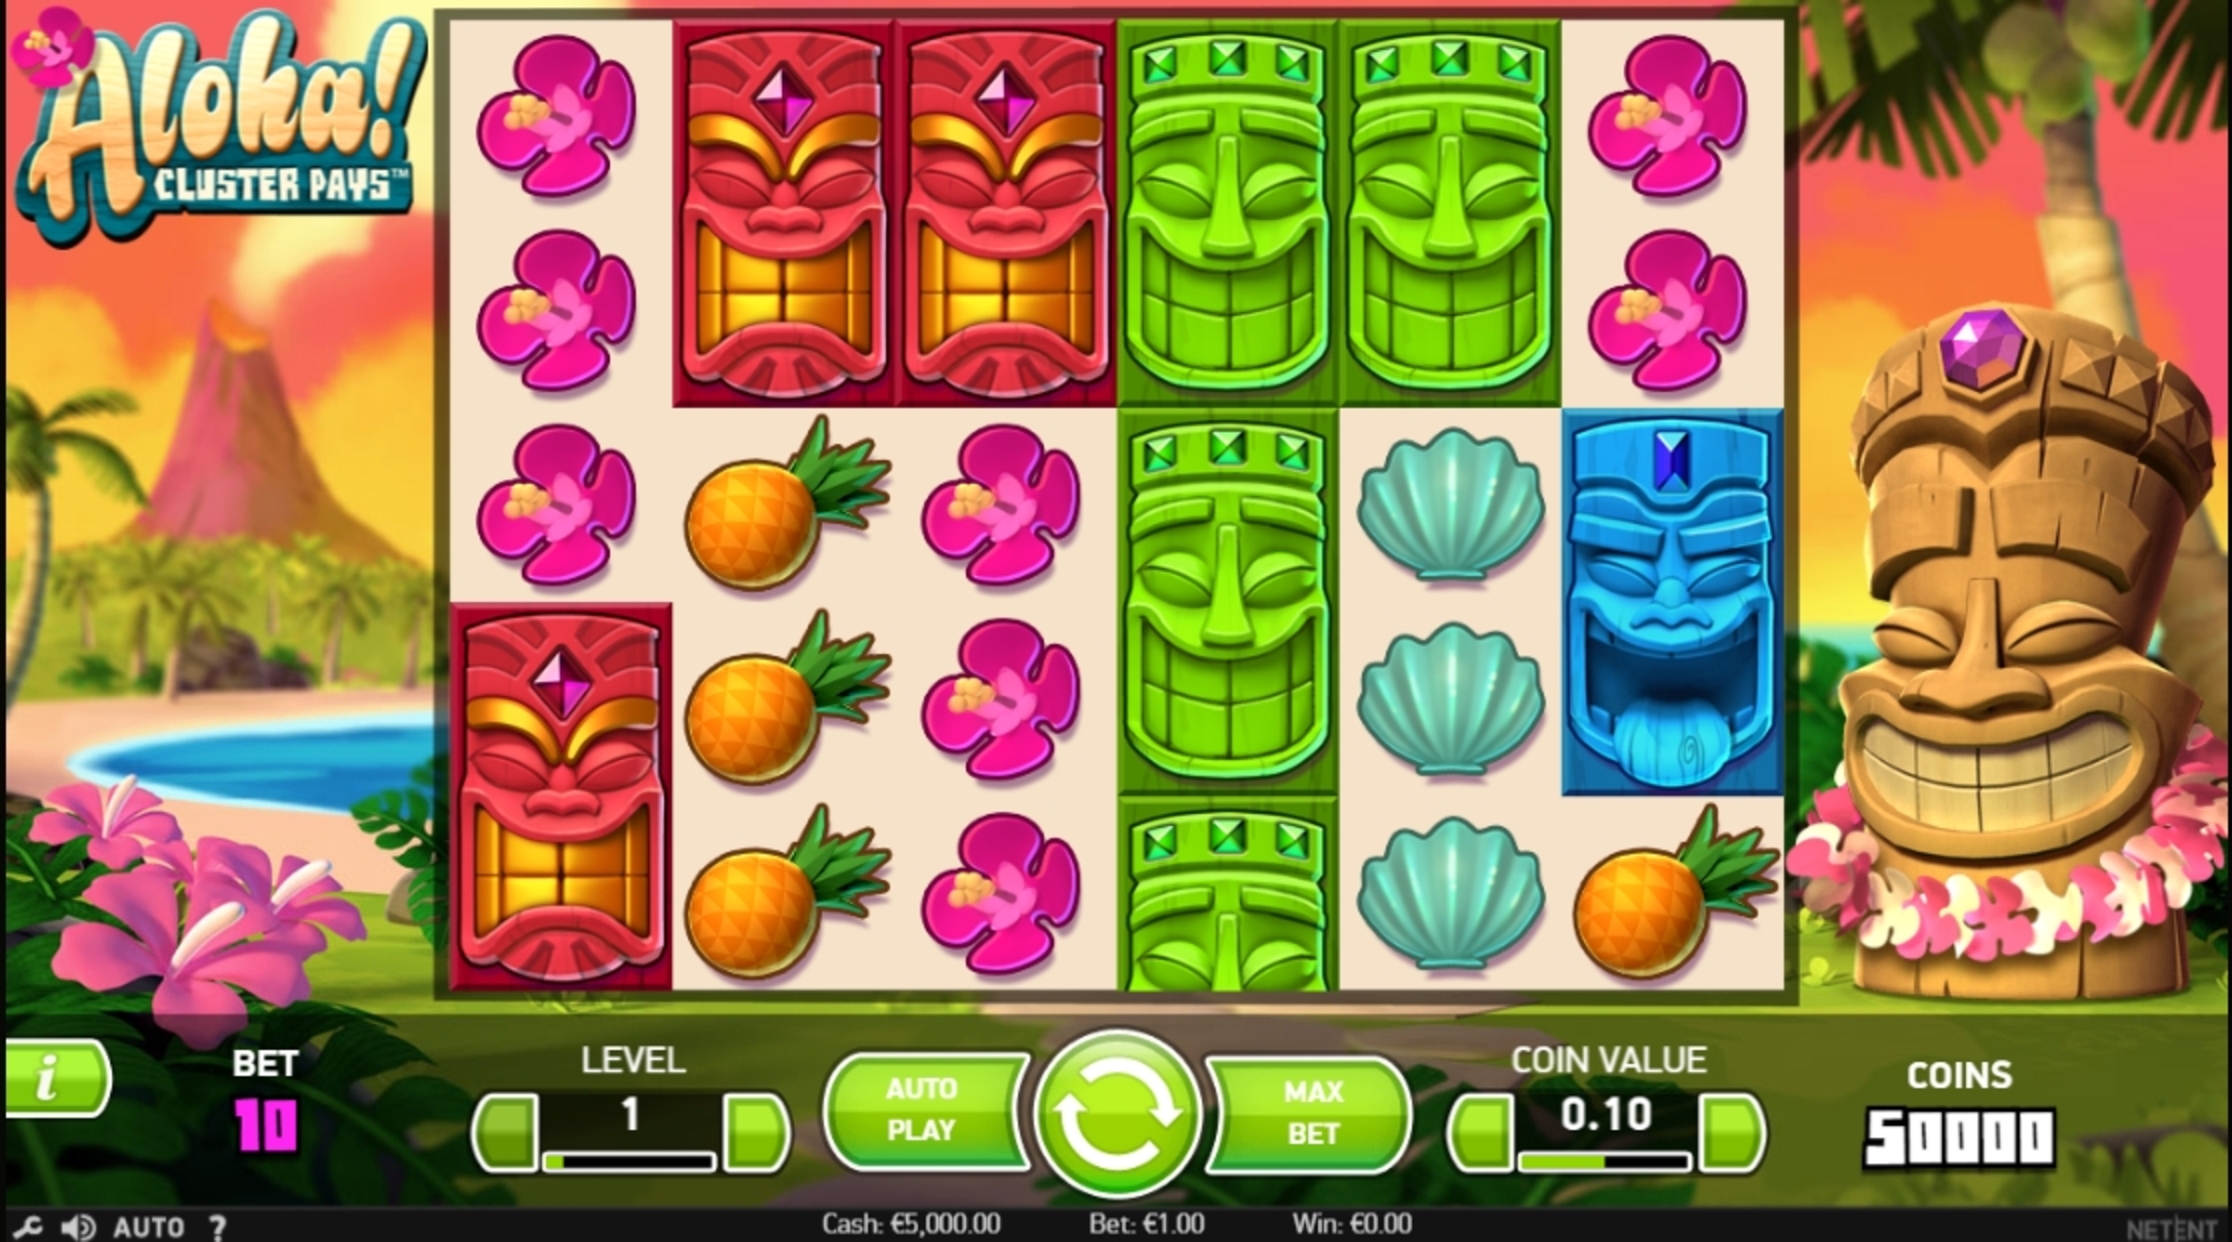 Reels in Aloha! Cluster Pays Slot Game by NetEnt